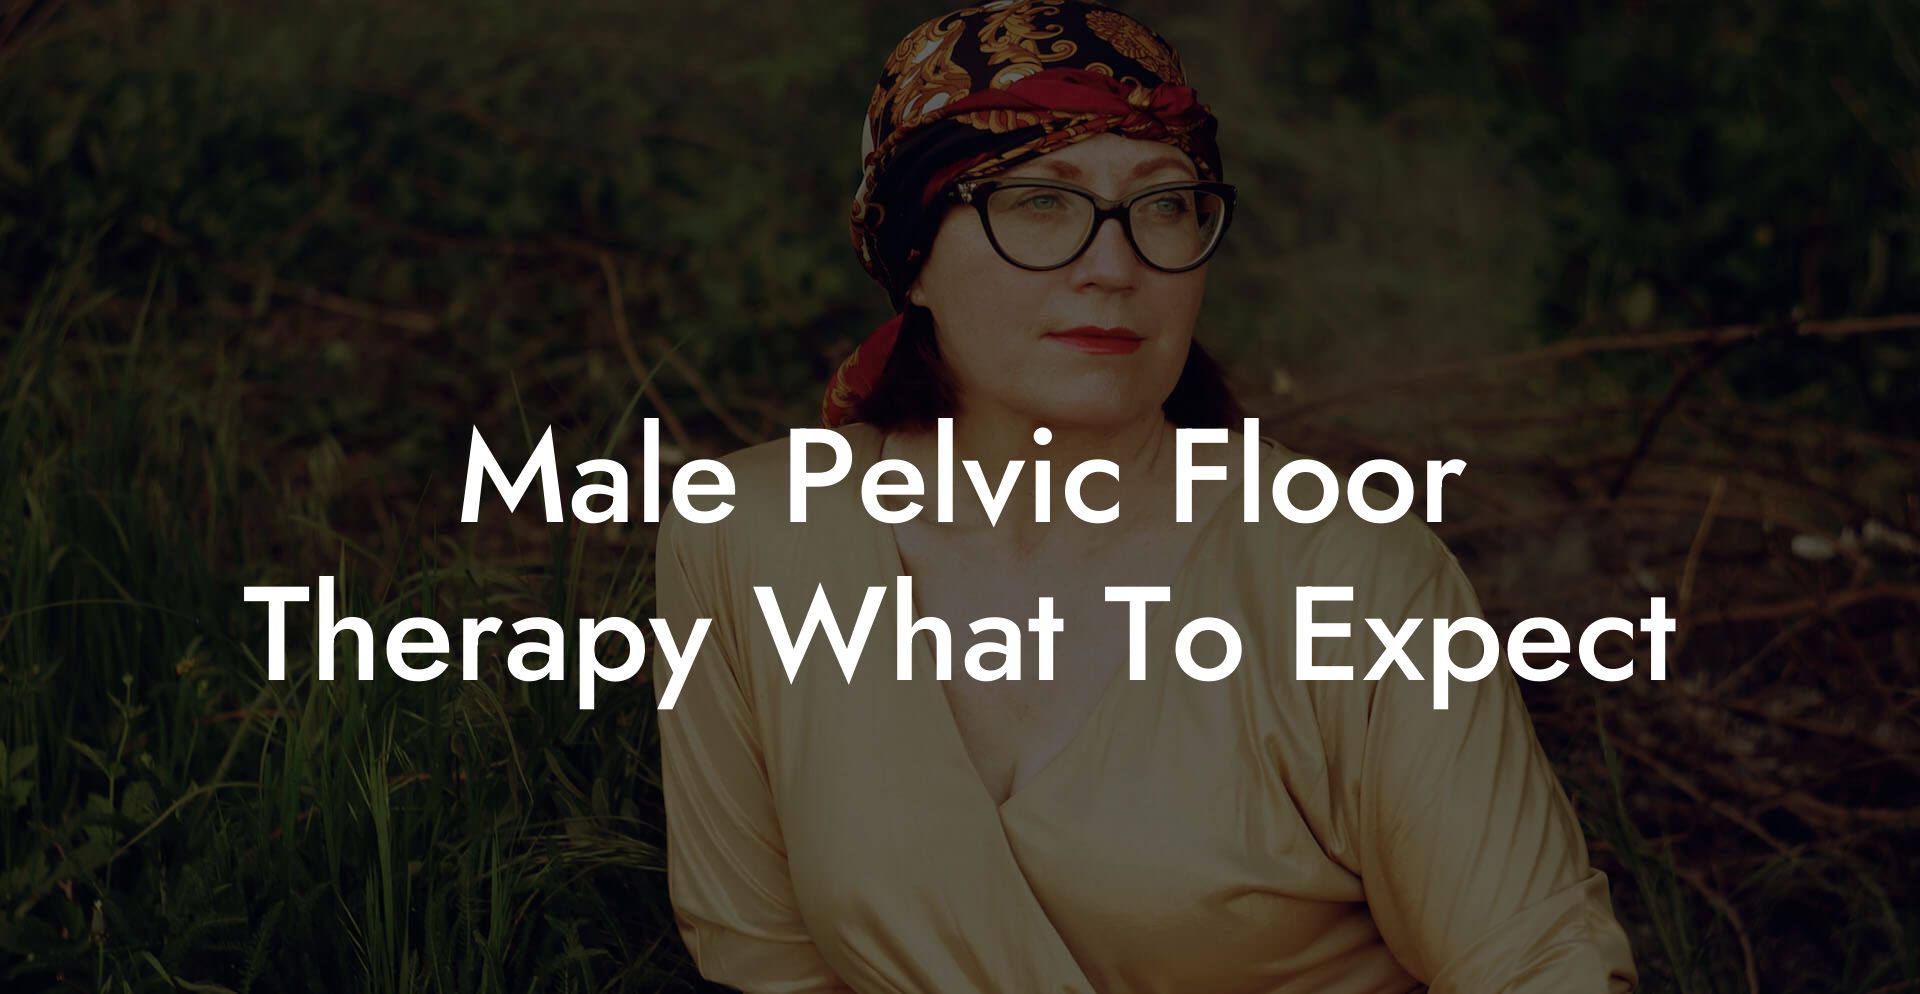 Male Pelvic Floor Therapy What To Expect